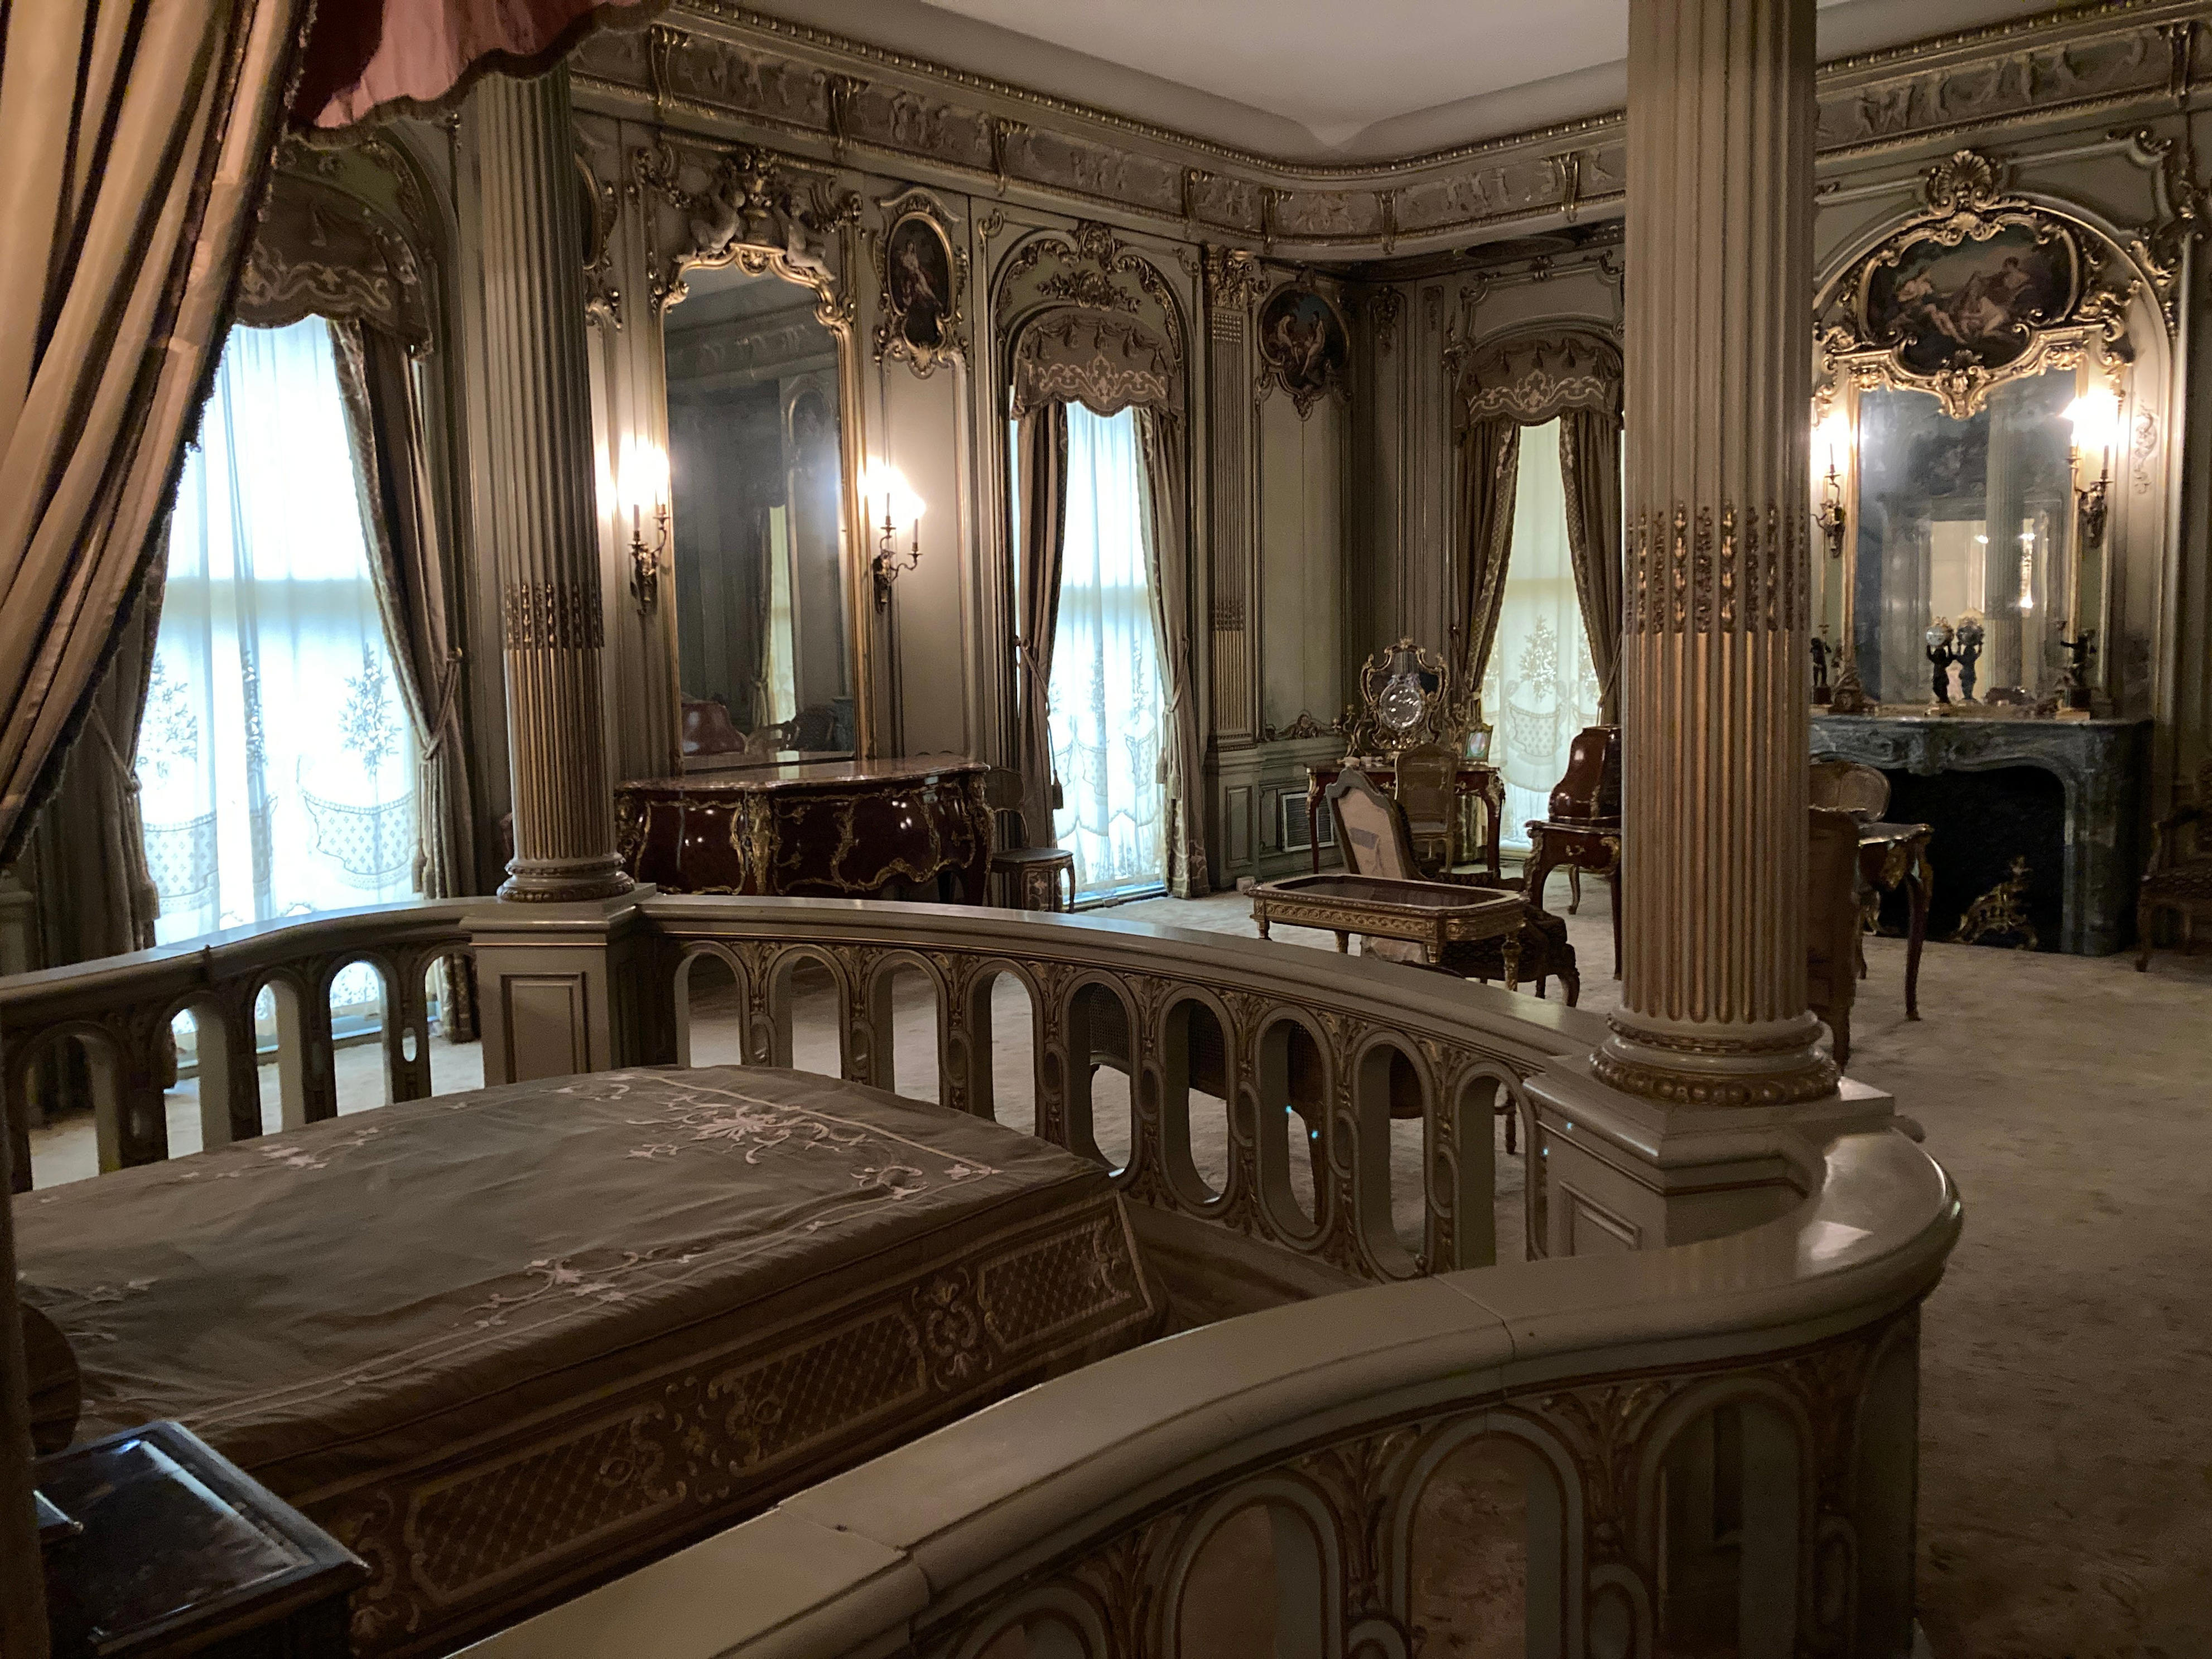 <p>In European palaces, railings around royal beds were utilized during daily ceremonies when a monarch woke up or during royal births. In Louise's bedroom, the railing was merely a decorative homage to the French architecture she loved.</p><p>Her room connected to Frederick's through an adjoining door. Frederick's room was closed for restoration when I visited.</p>